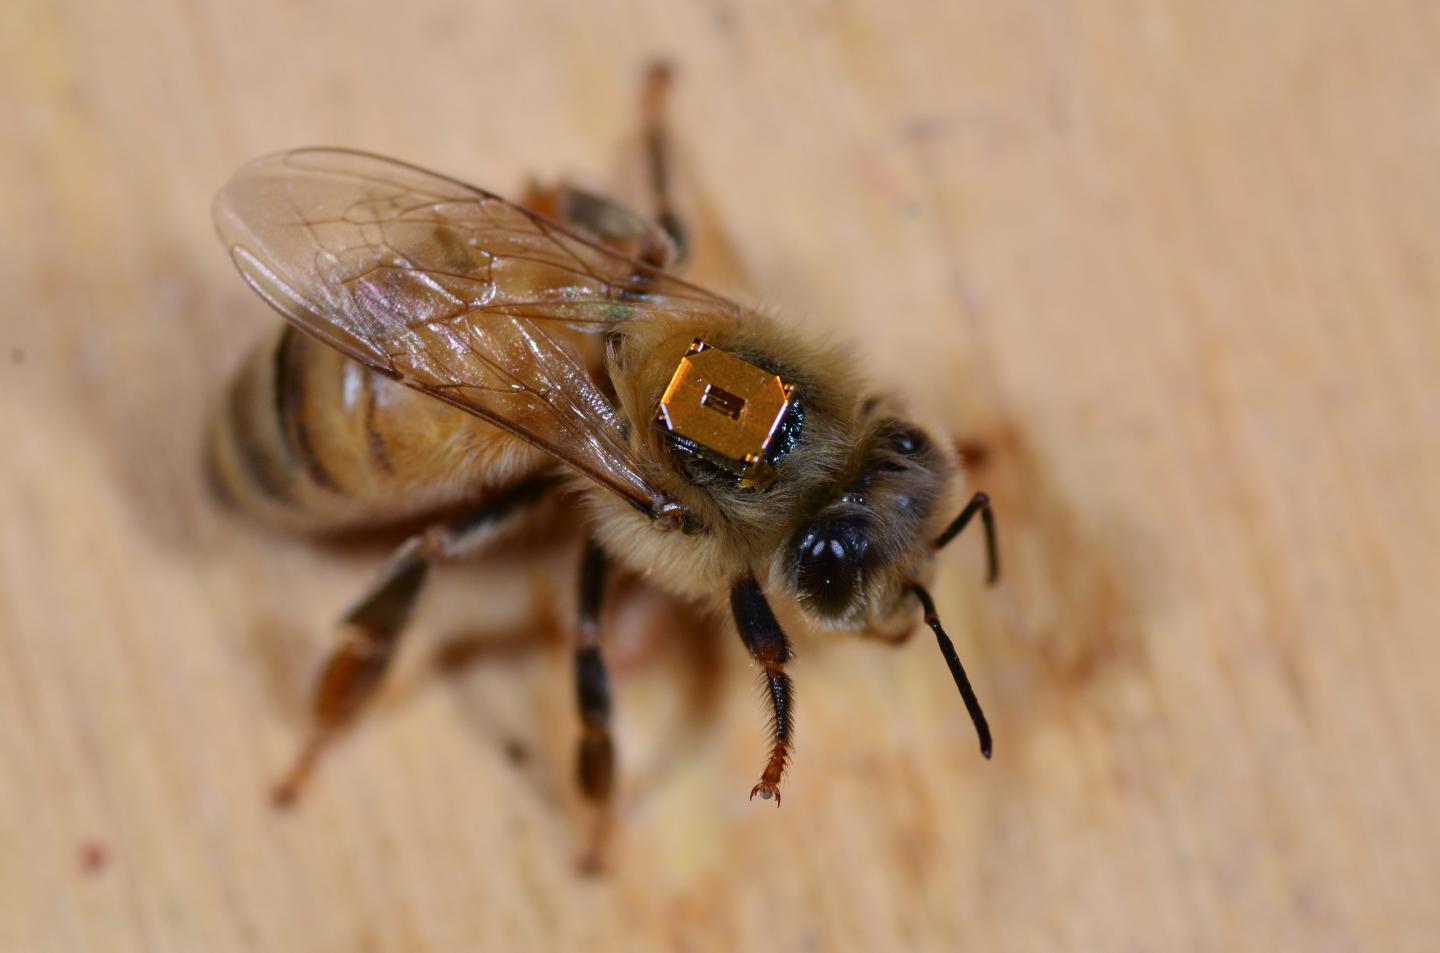 Field Tests Show Sustained Neonicotinoid Exposure Negatively Affects Bees